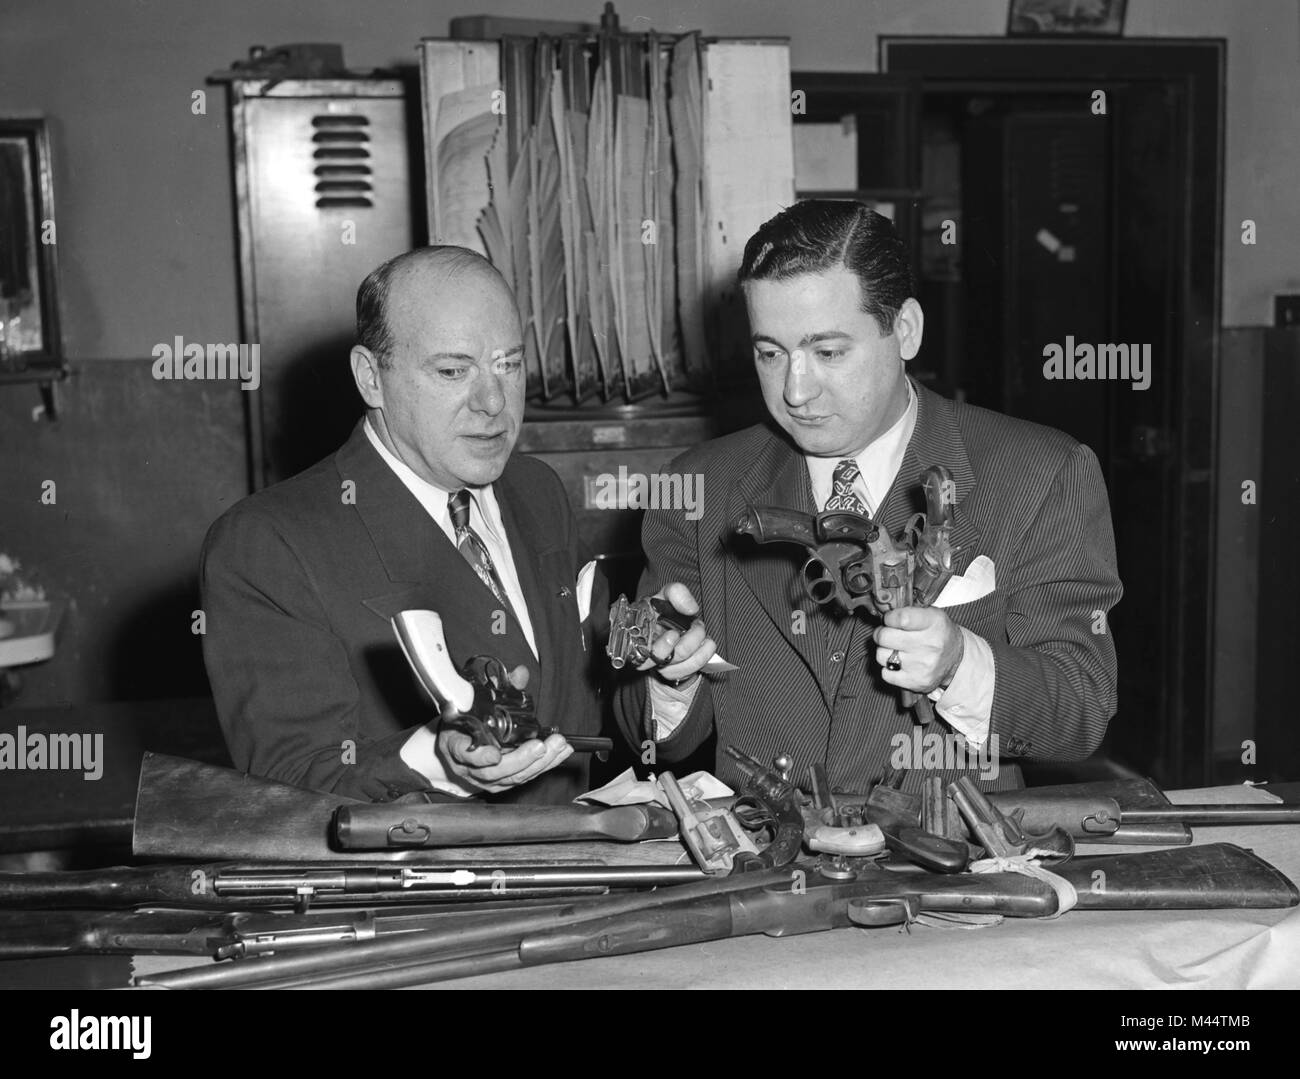 Chicago police display a cache of seized illegal guns, ca. 1955. Stock Photo